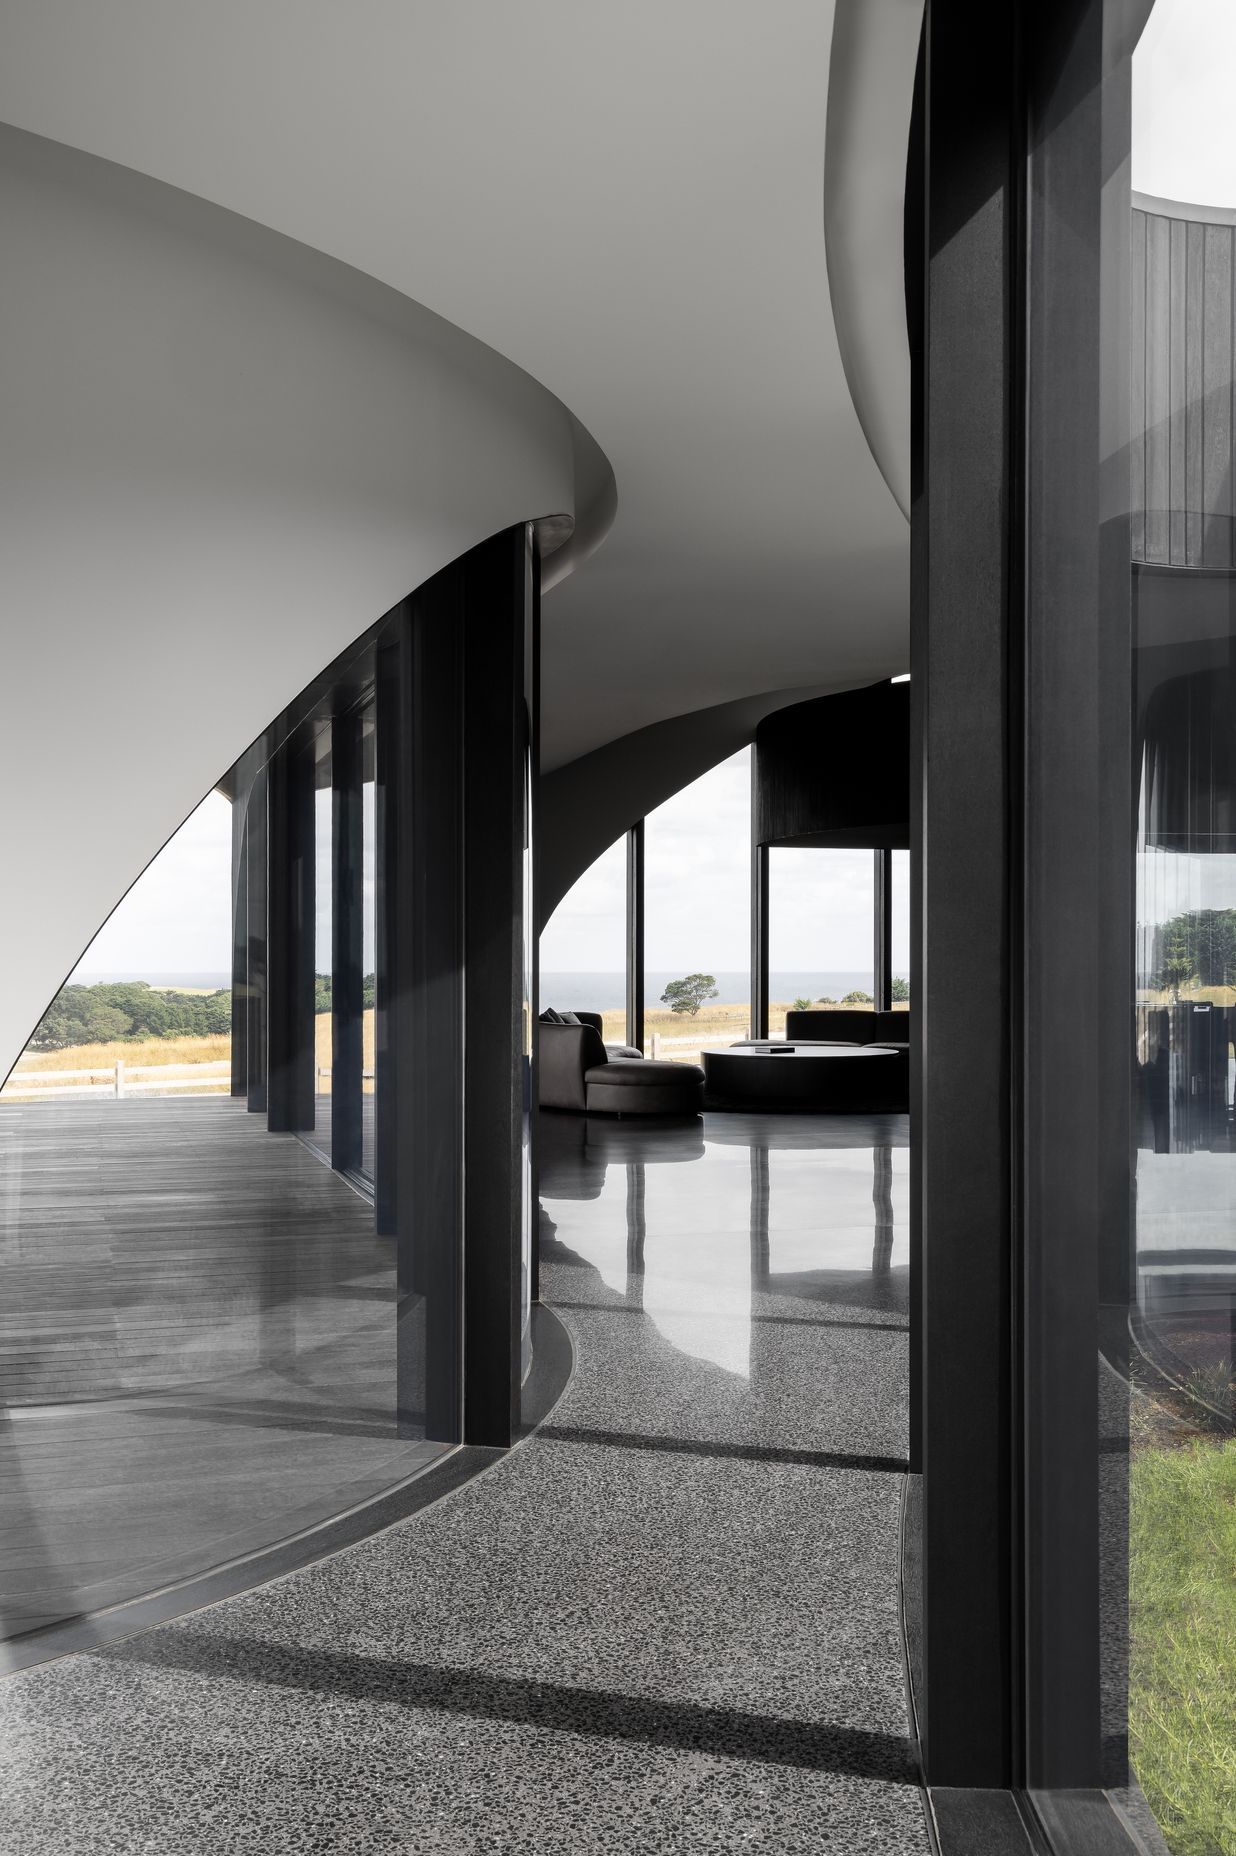 Custom curved windows mirror the rolling landscape at Peninsula House.